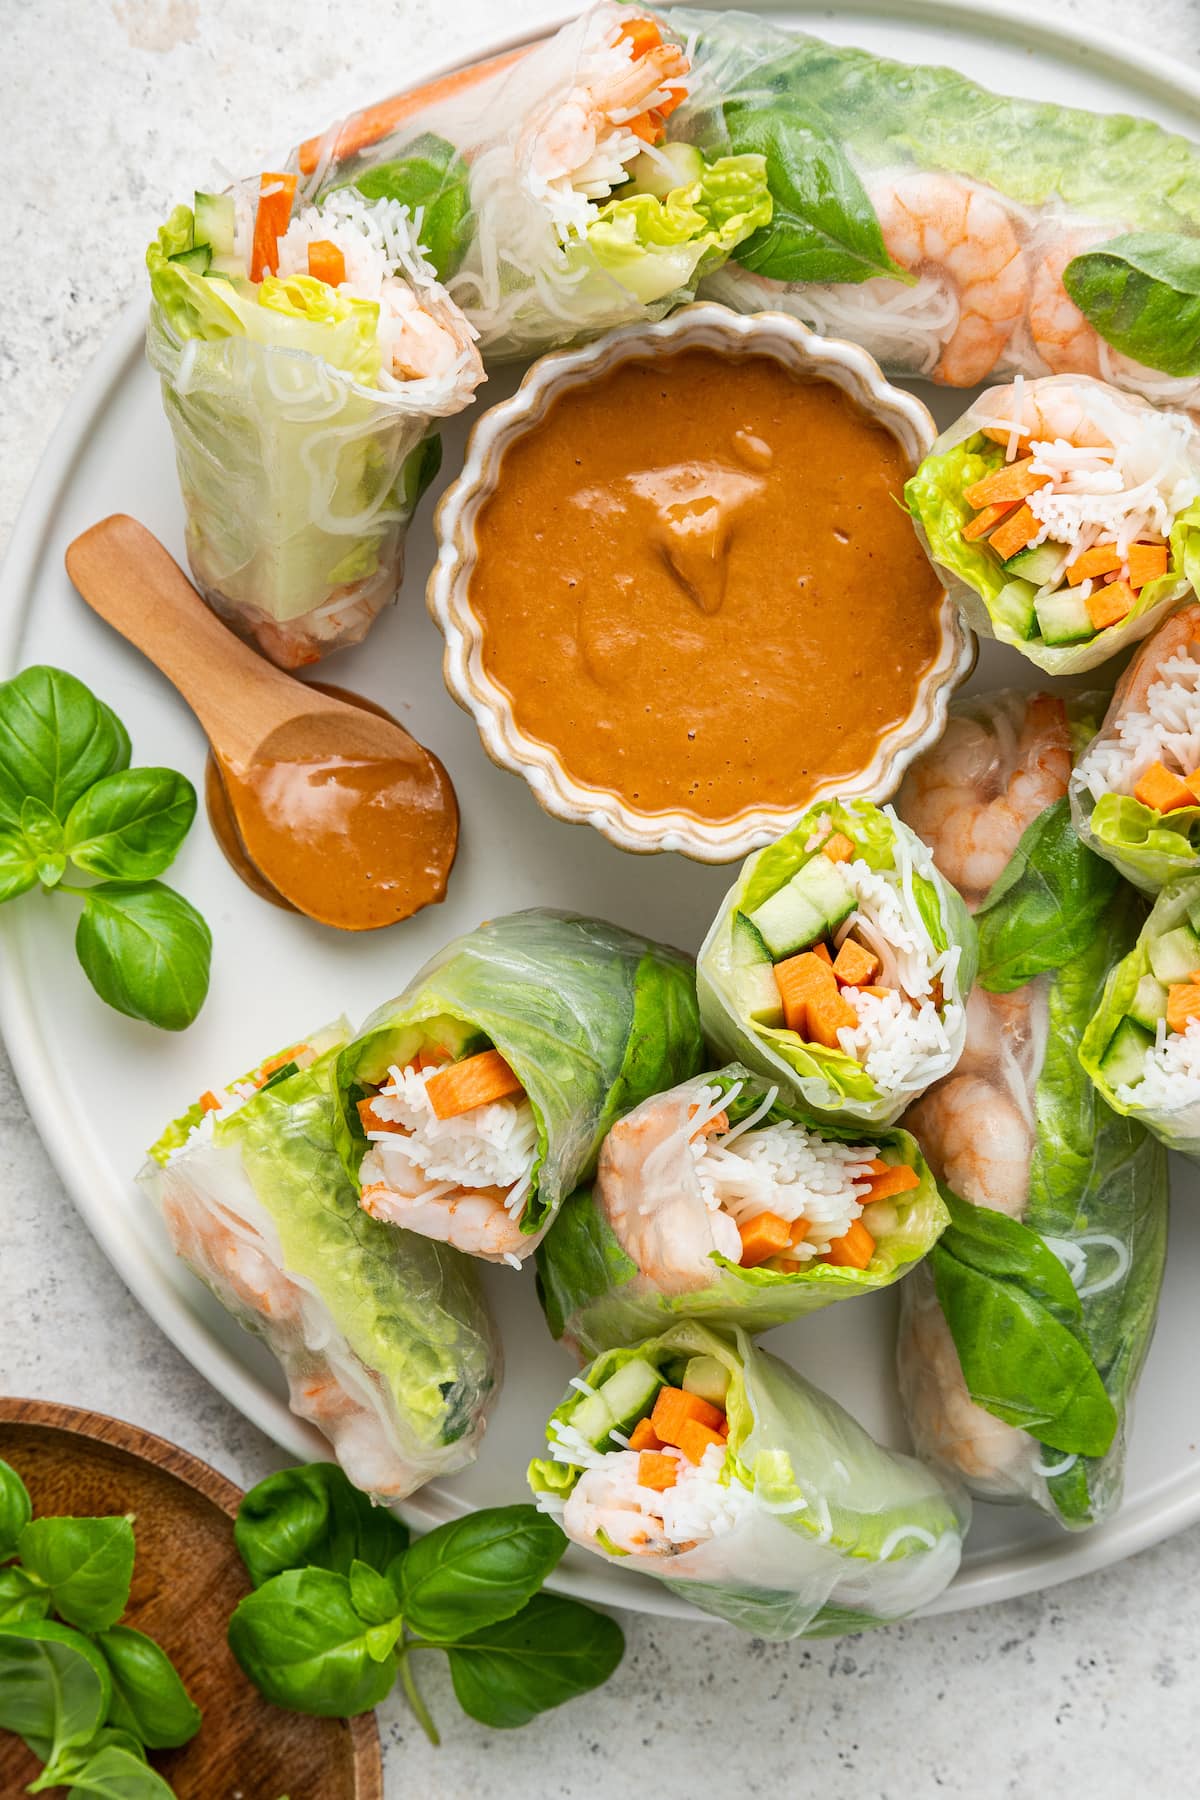 A large white plate containing multiple shrimp spring rolls, some cut in half, and a peanut sauce in a small white bowl.